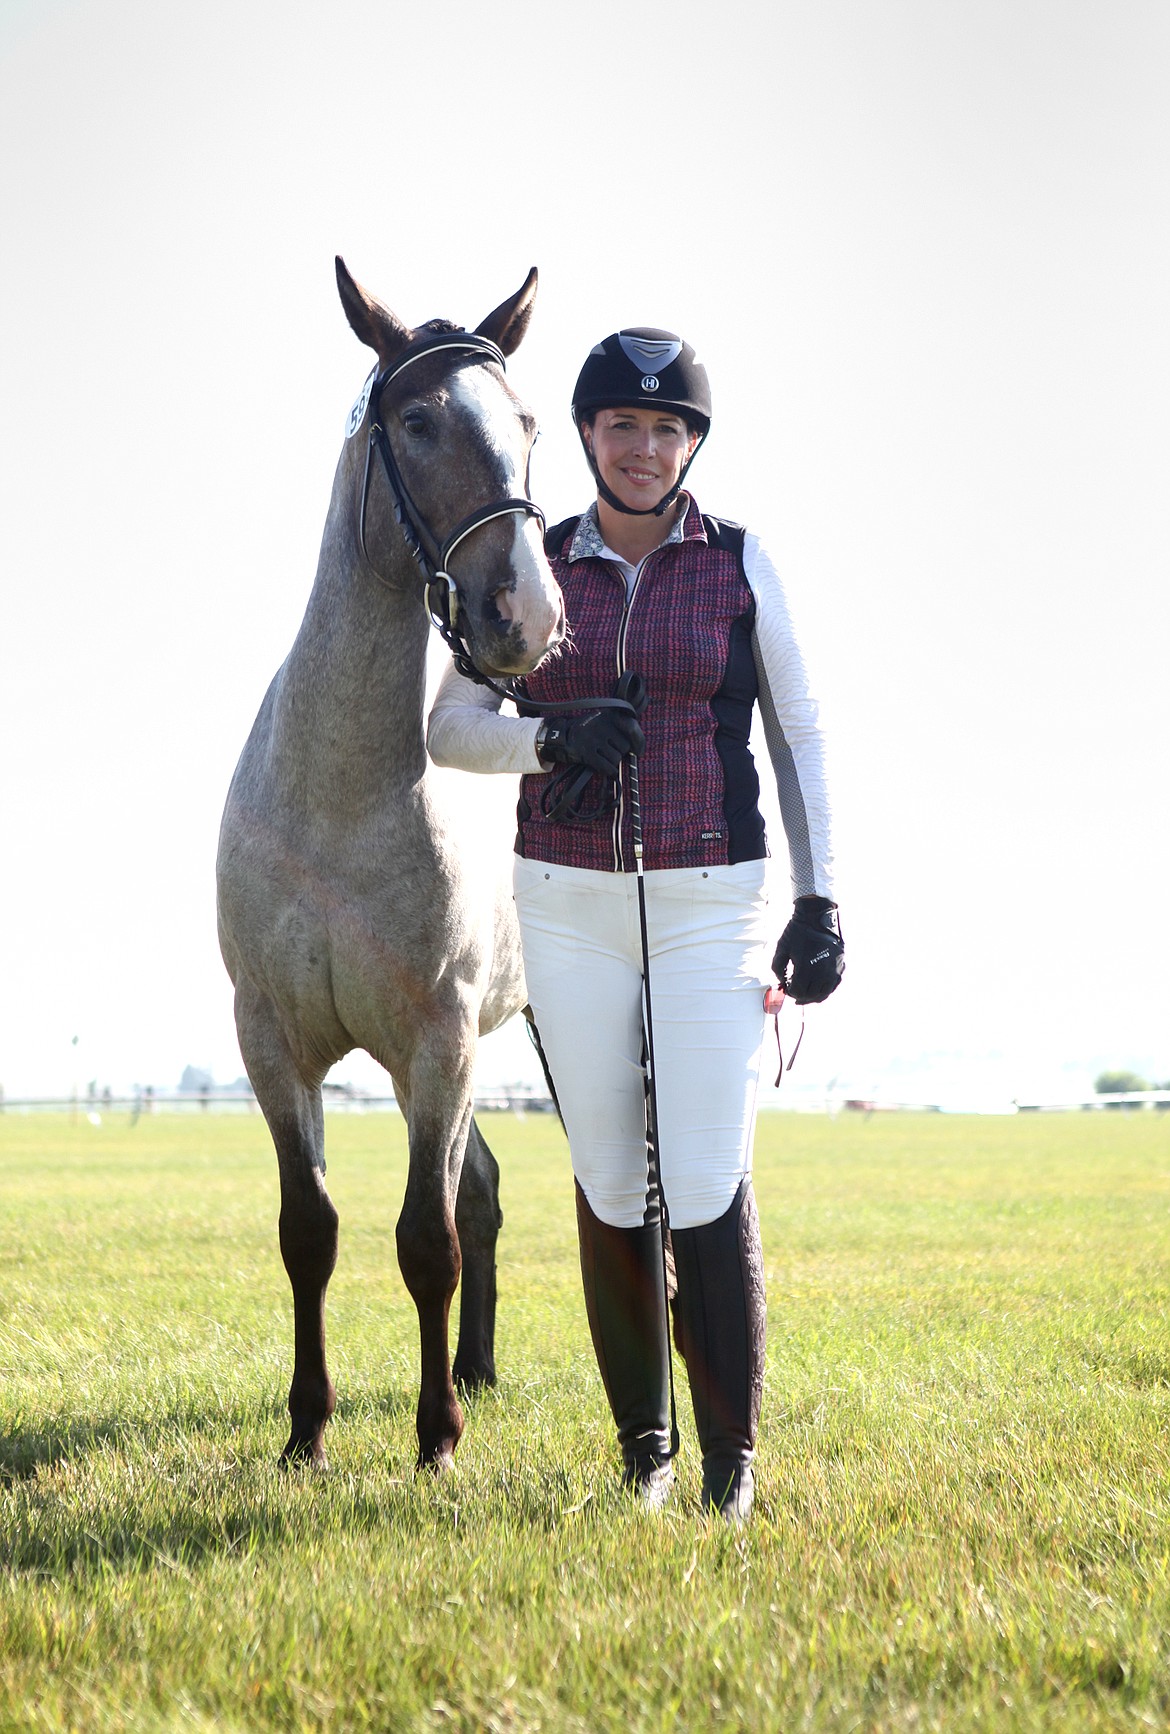 Livingston's Michelle Donaldson poses with her rescue horse, Twisted Oliver, after the pair competed in the future event horse, 2-year-old division, at Rebecca Farm July 18. (Mackenzie Reiss/Daily Inter Lake)